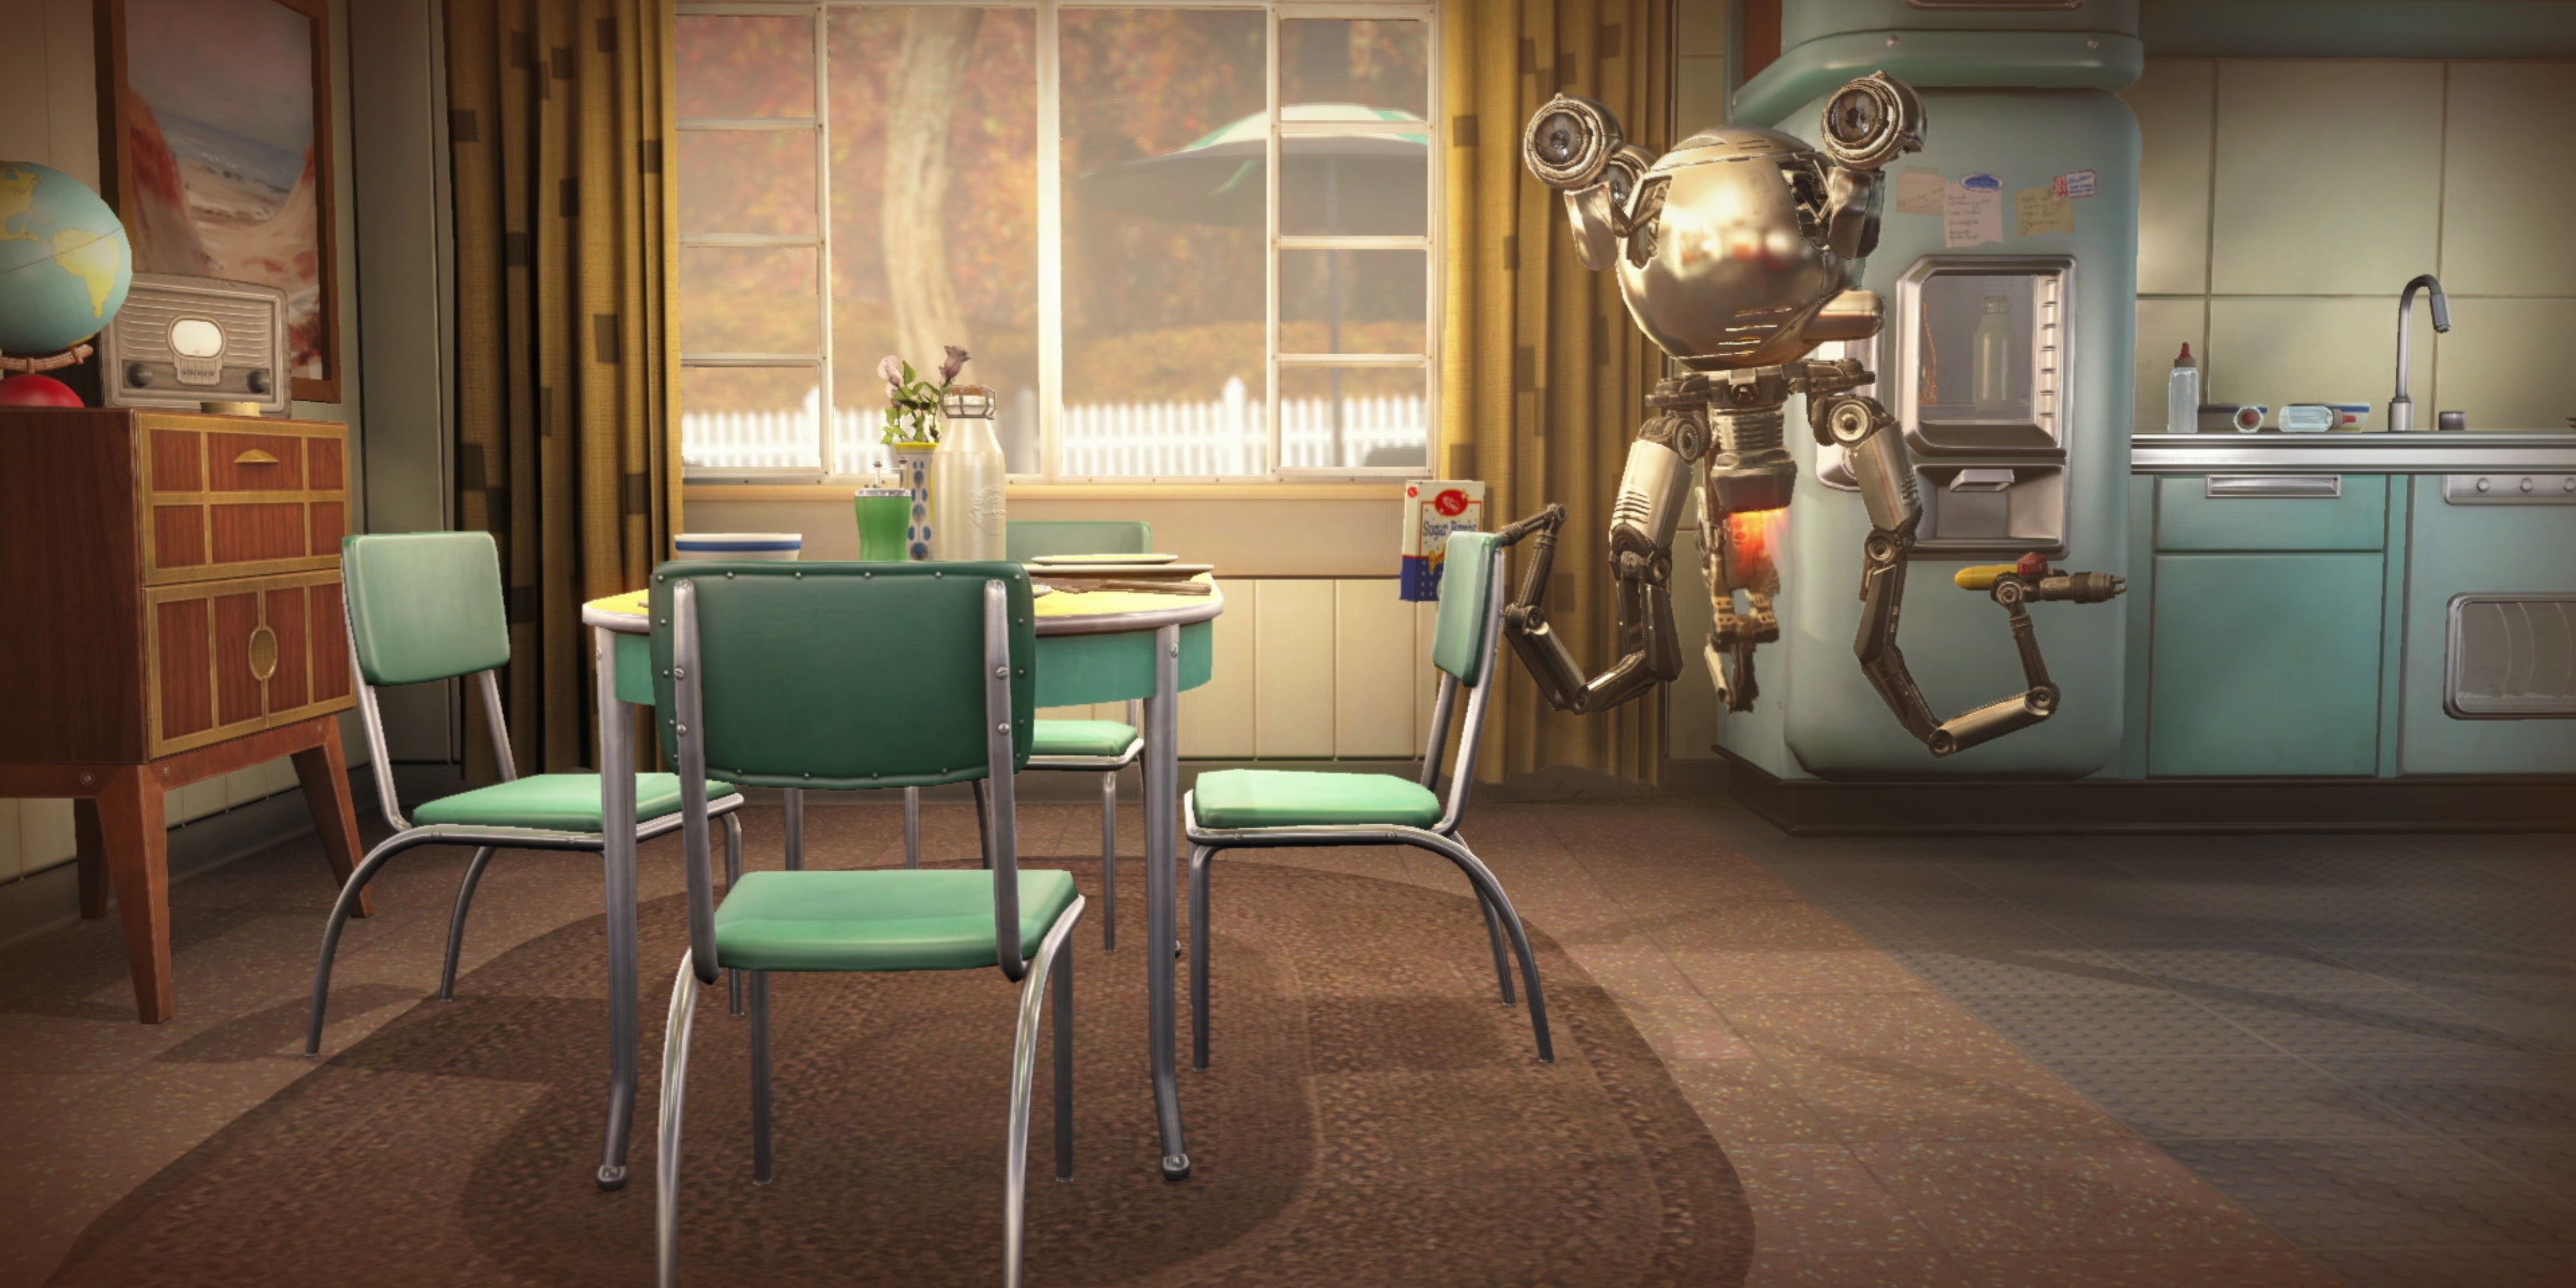 mister handy in fallout 4